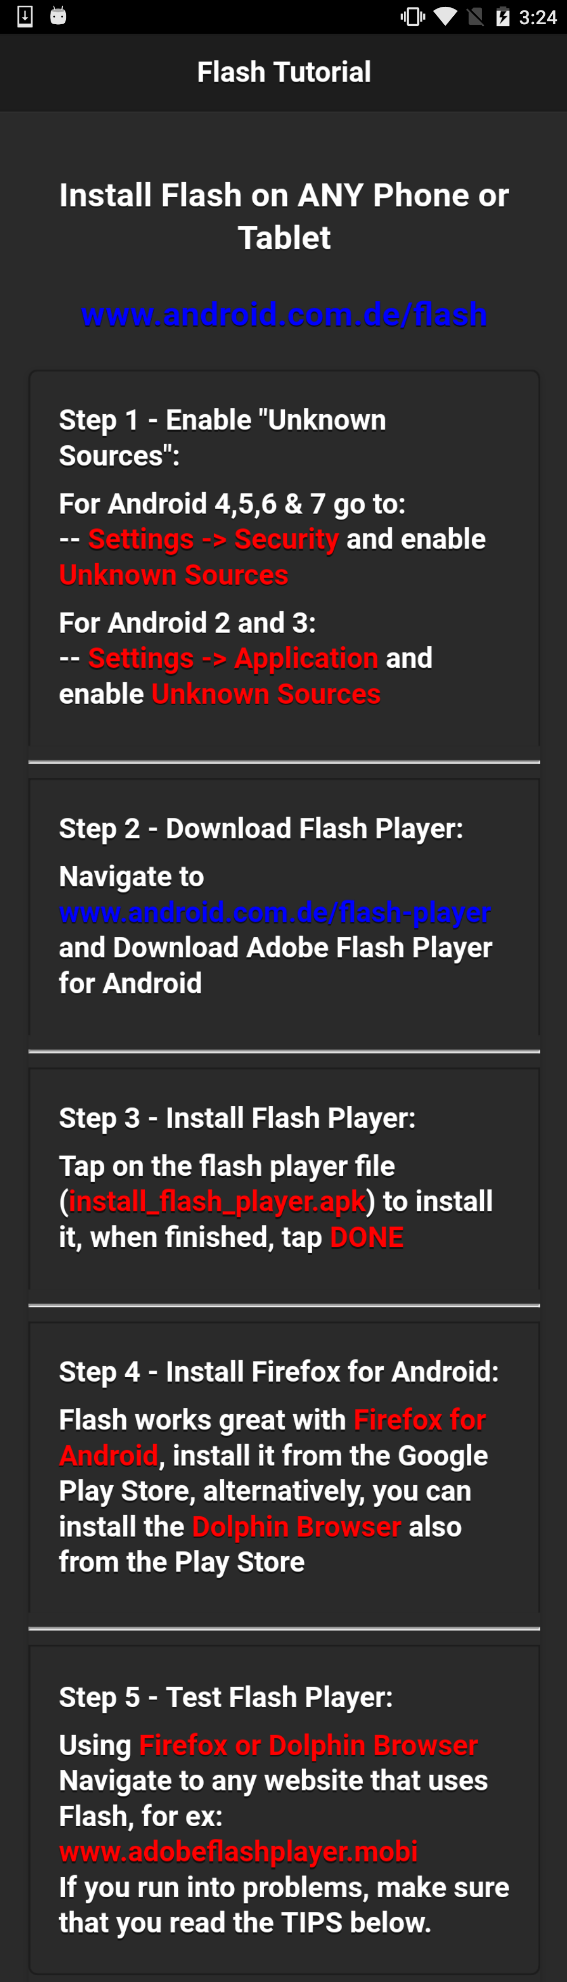 Don't pay for what is for free: Malicious Adobe Flash Player app found on  Google Play | WeLiveSecurity